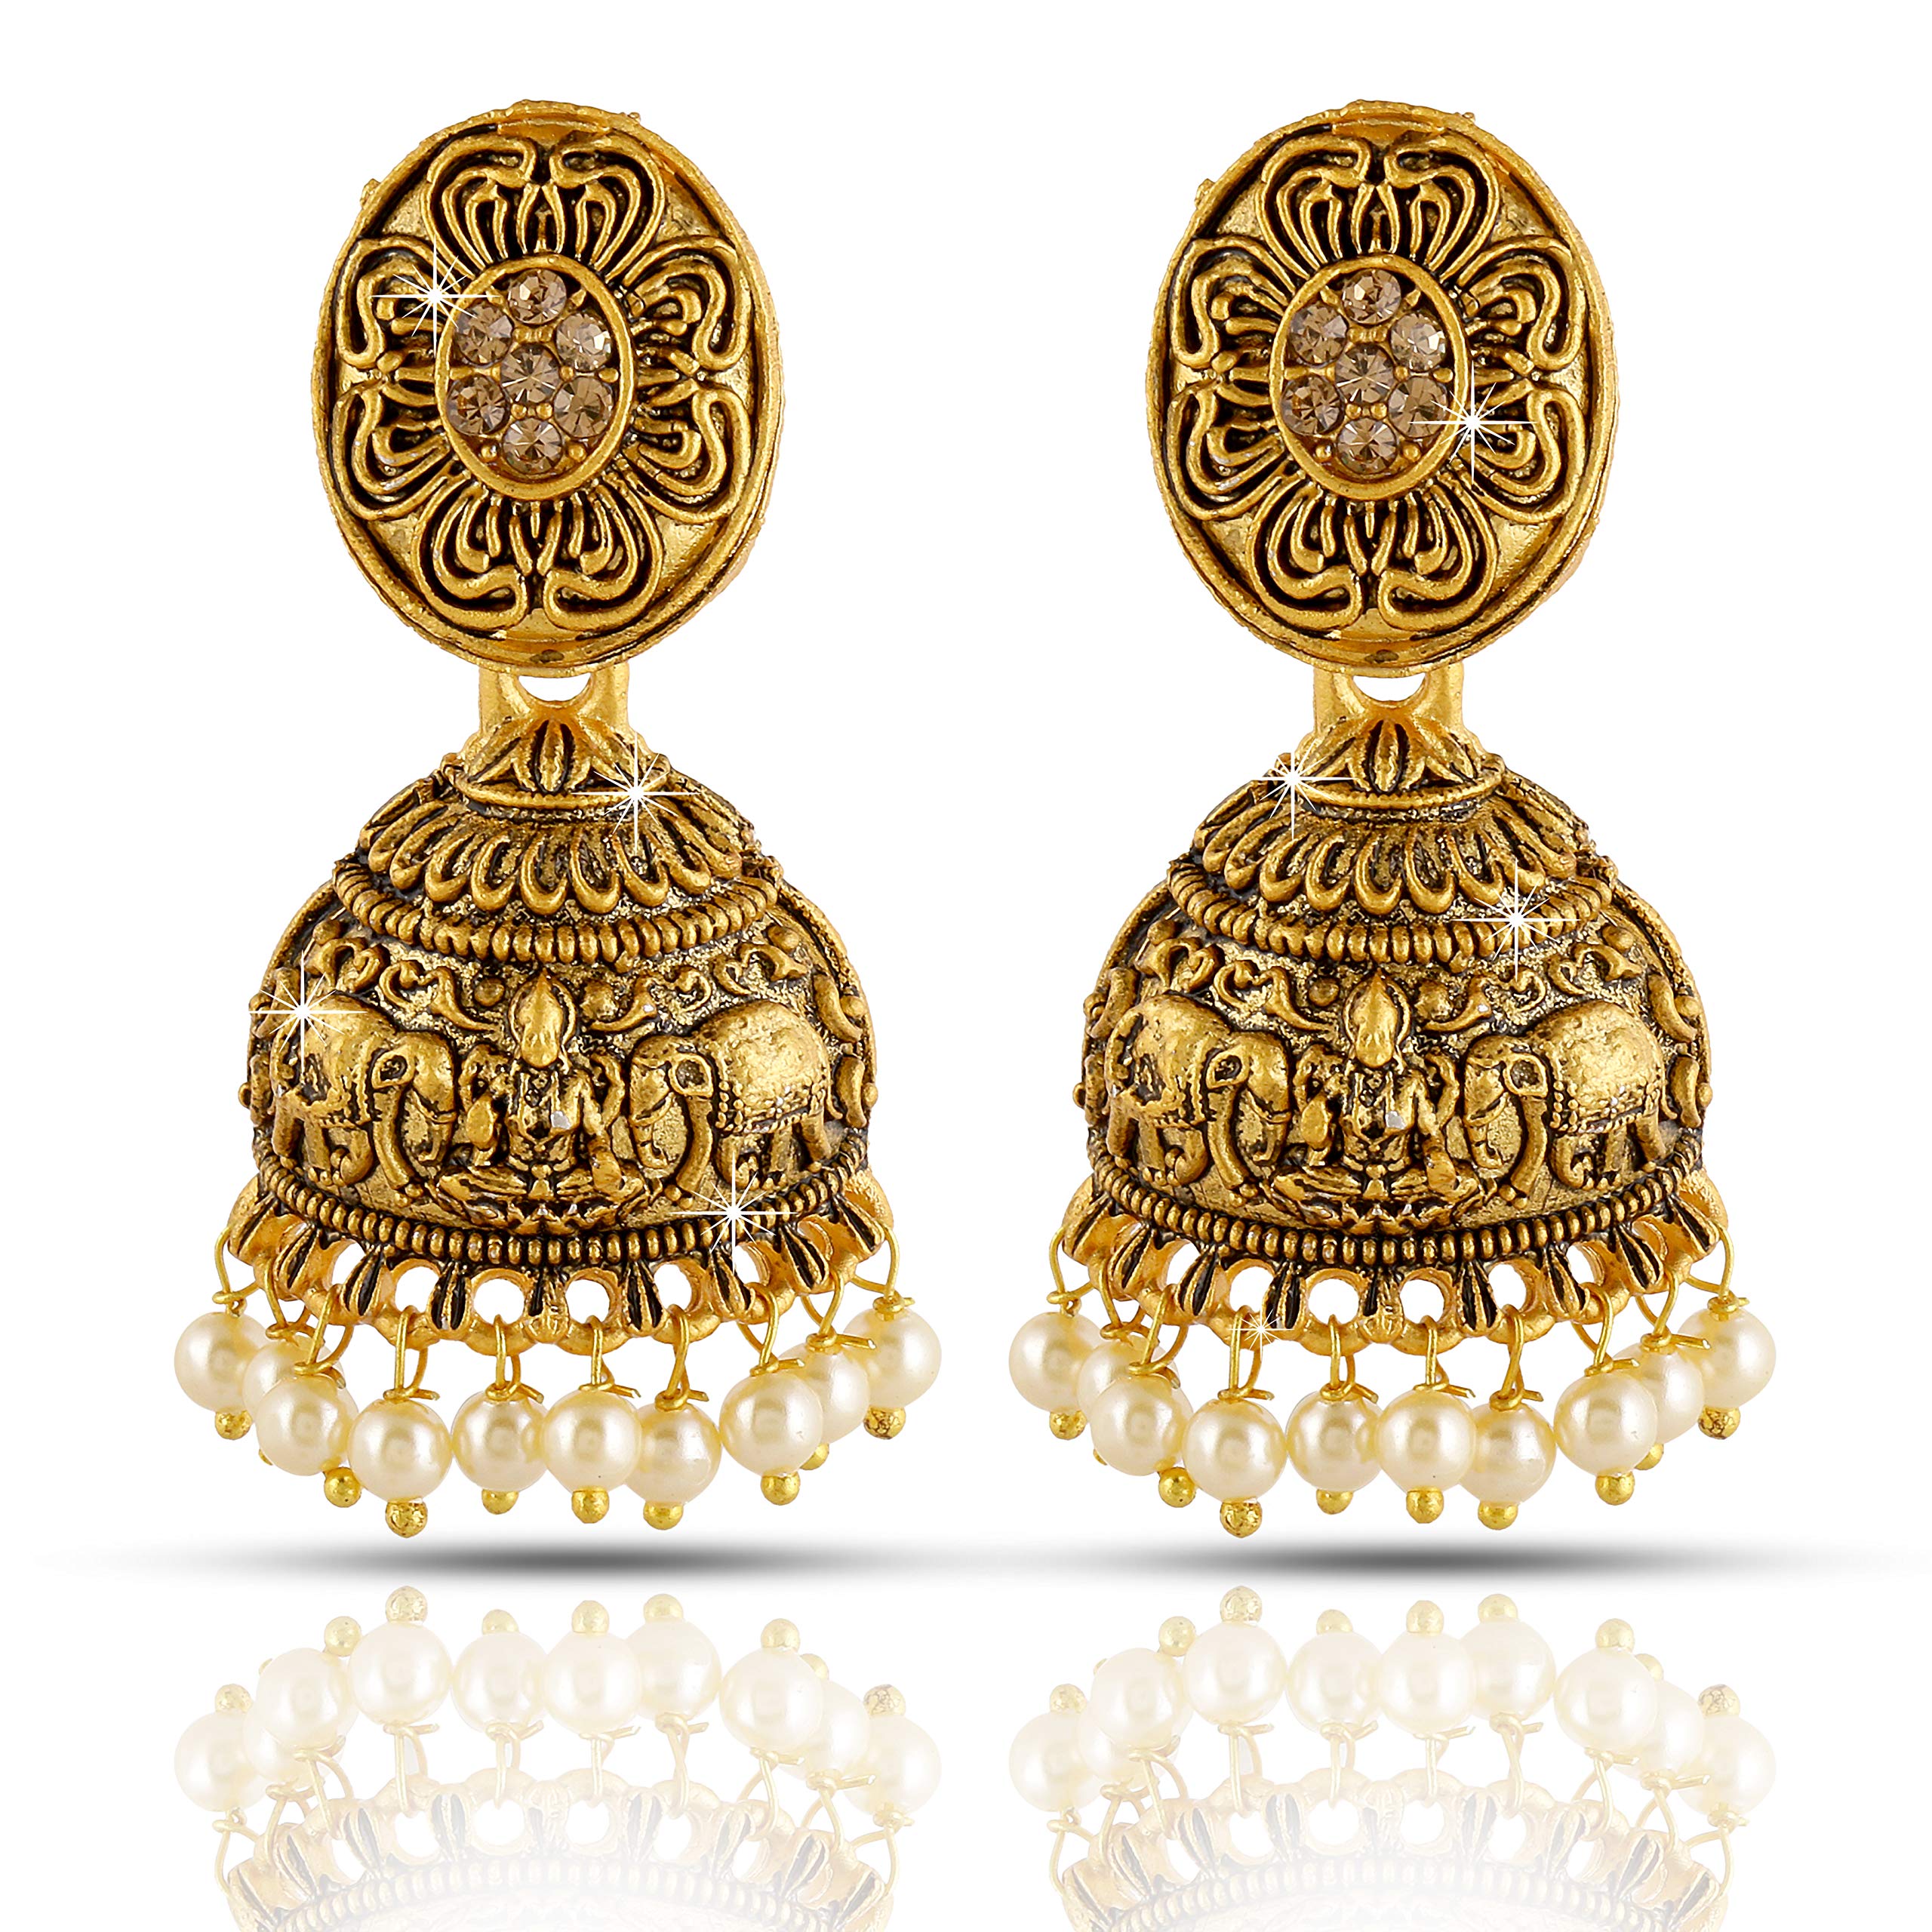 Yellow Chimes Traditional Jhumki Earrings Temple Jewellery Oxidized Matte Gold Plated Artistic Crafted Lakshmi Pearl Jhumka Earrings for Womens & Girls